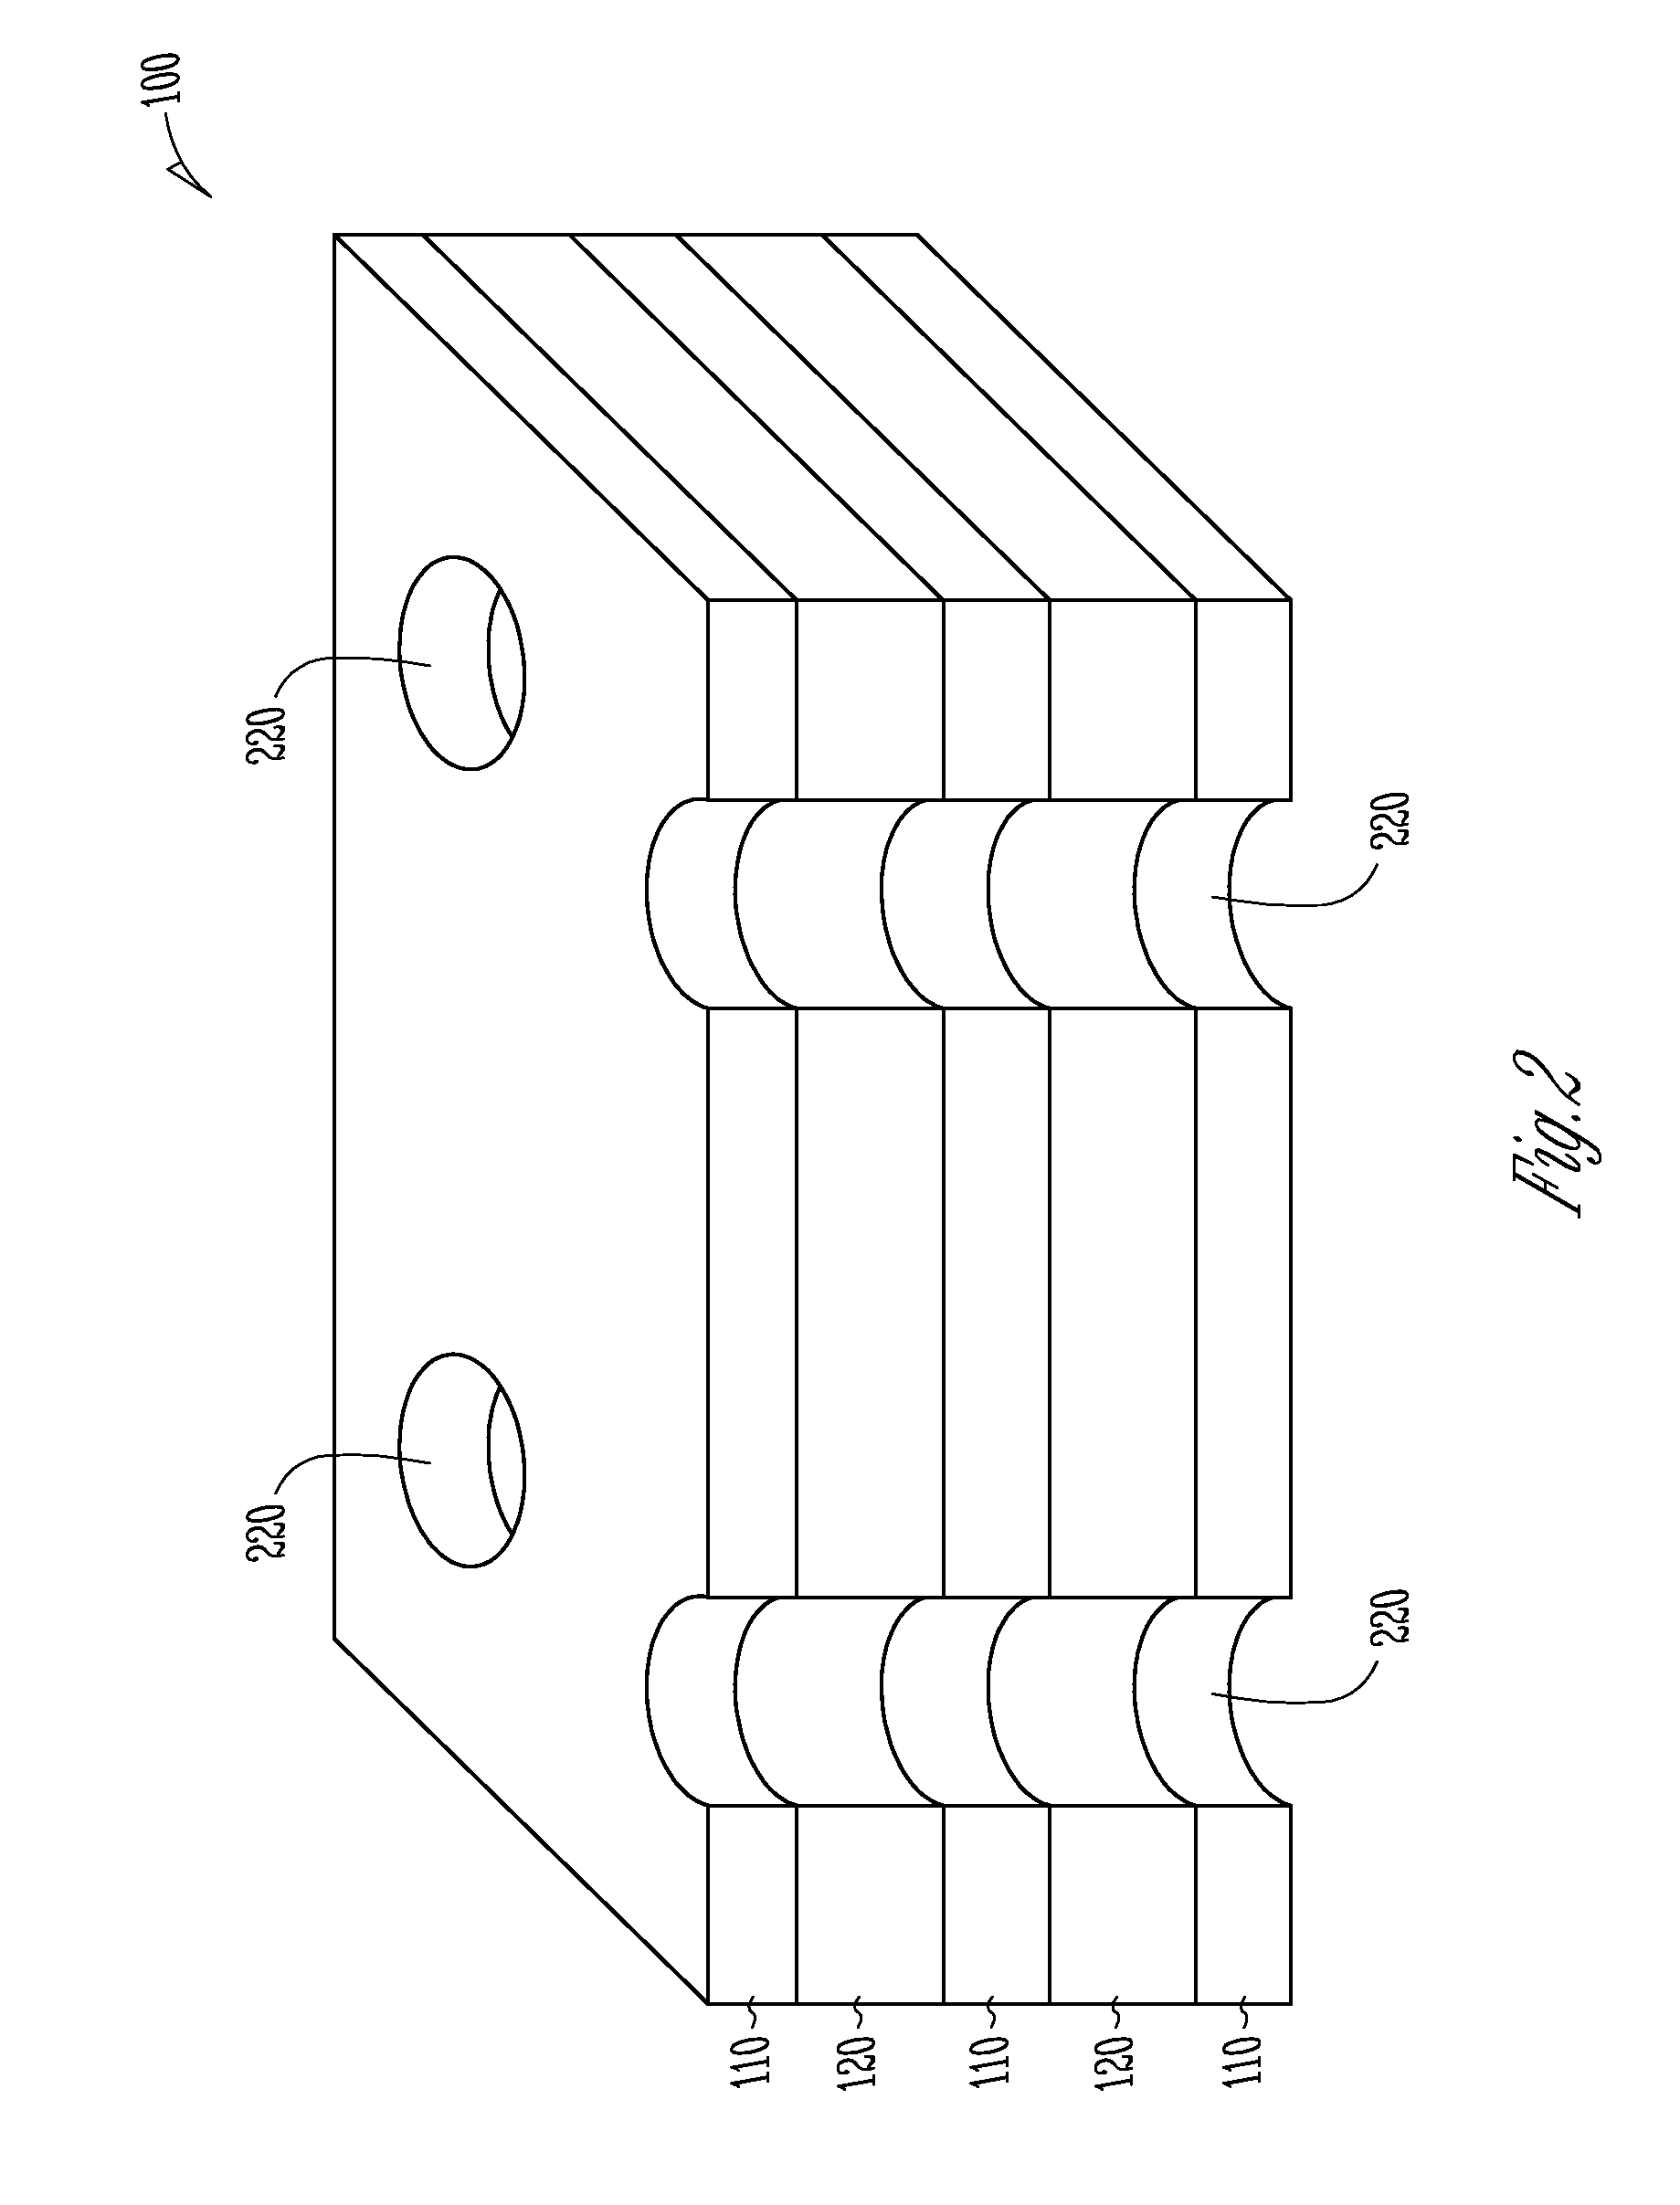 Semiconductor charge storage apparatus and methods